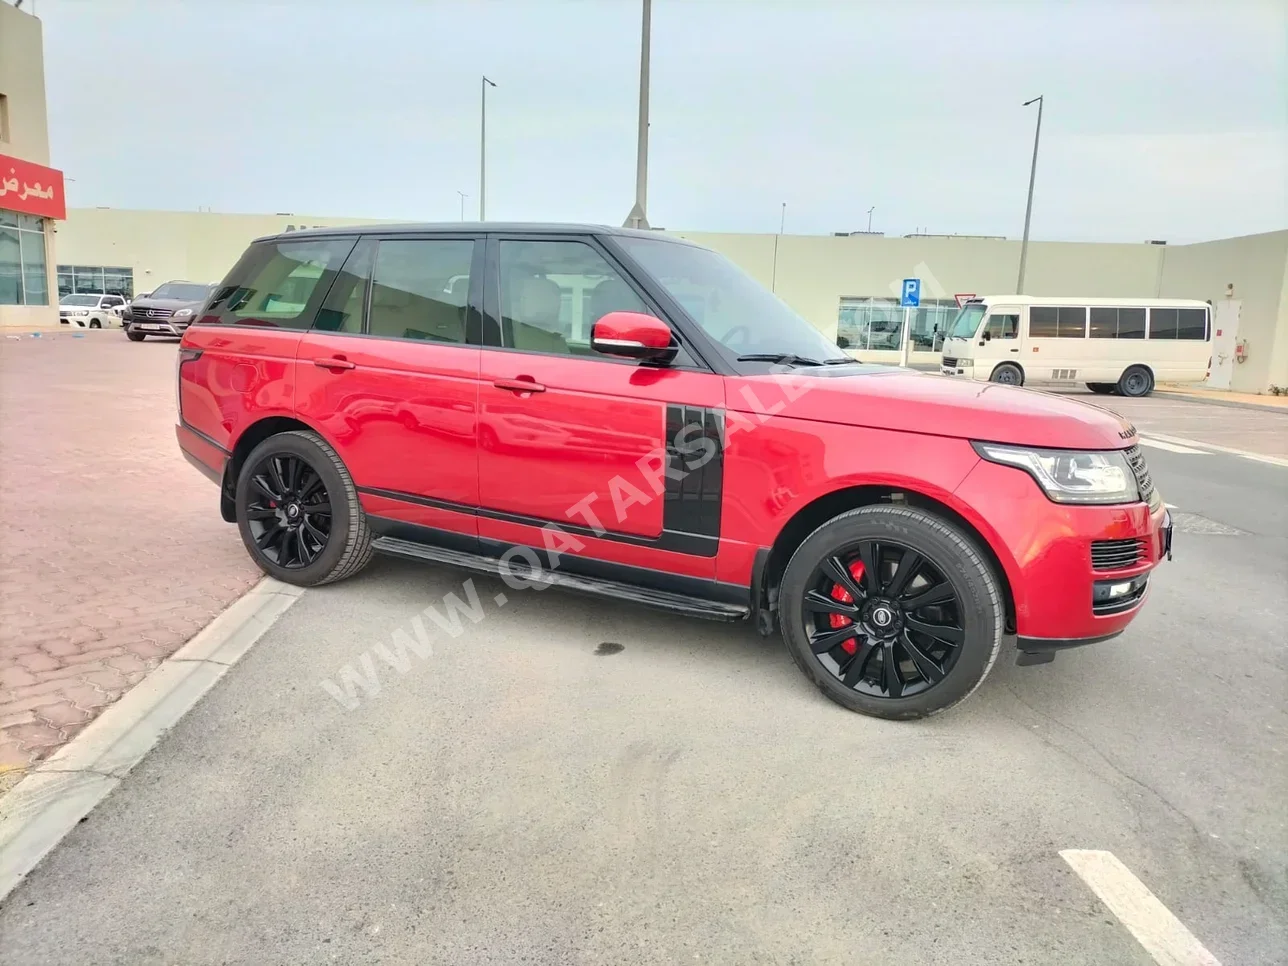 Land Rover  Range Rover  Sport SE  2013  Automatic  144,000 Km  8 Cylinder  All Wheel Drive (AWD)  SUV  Red